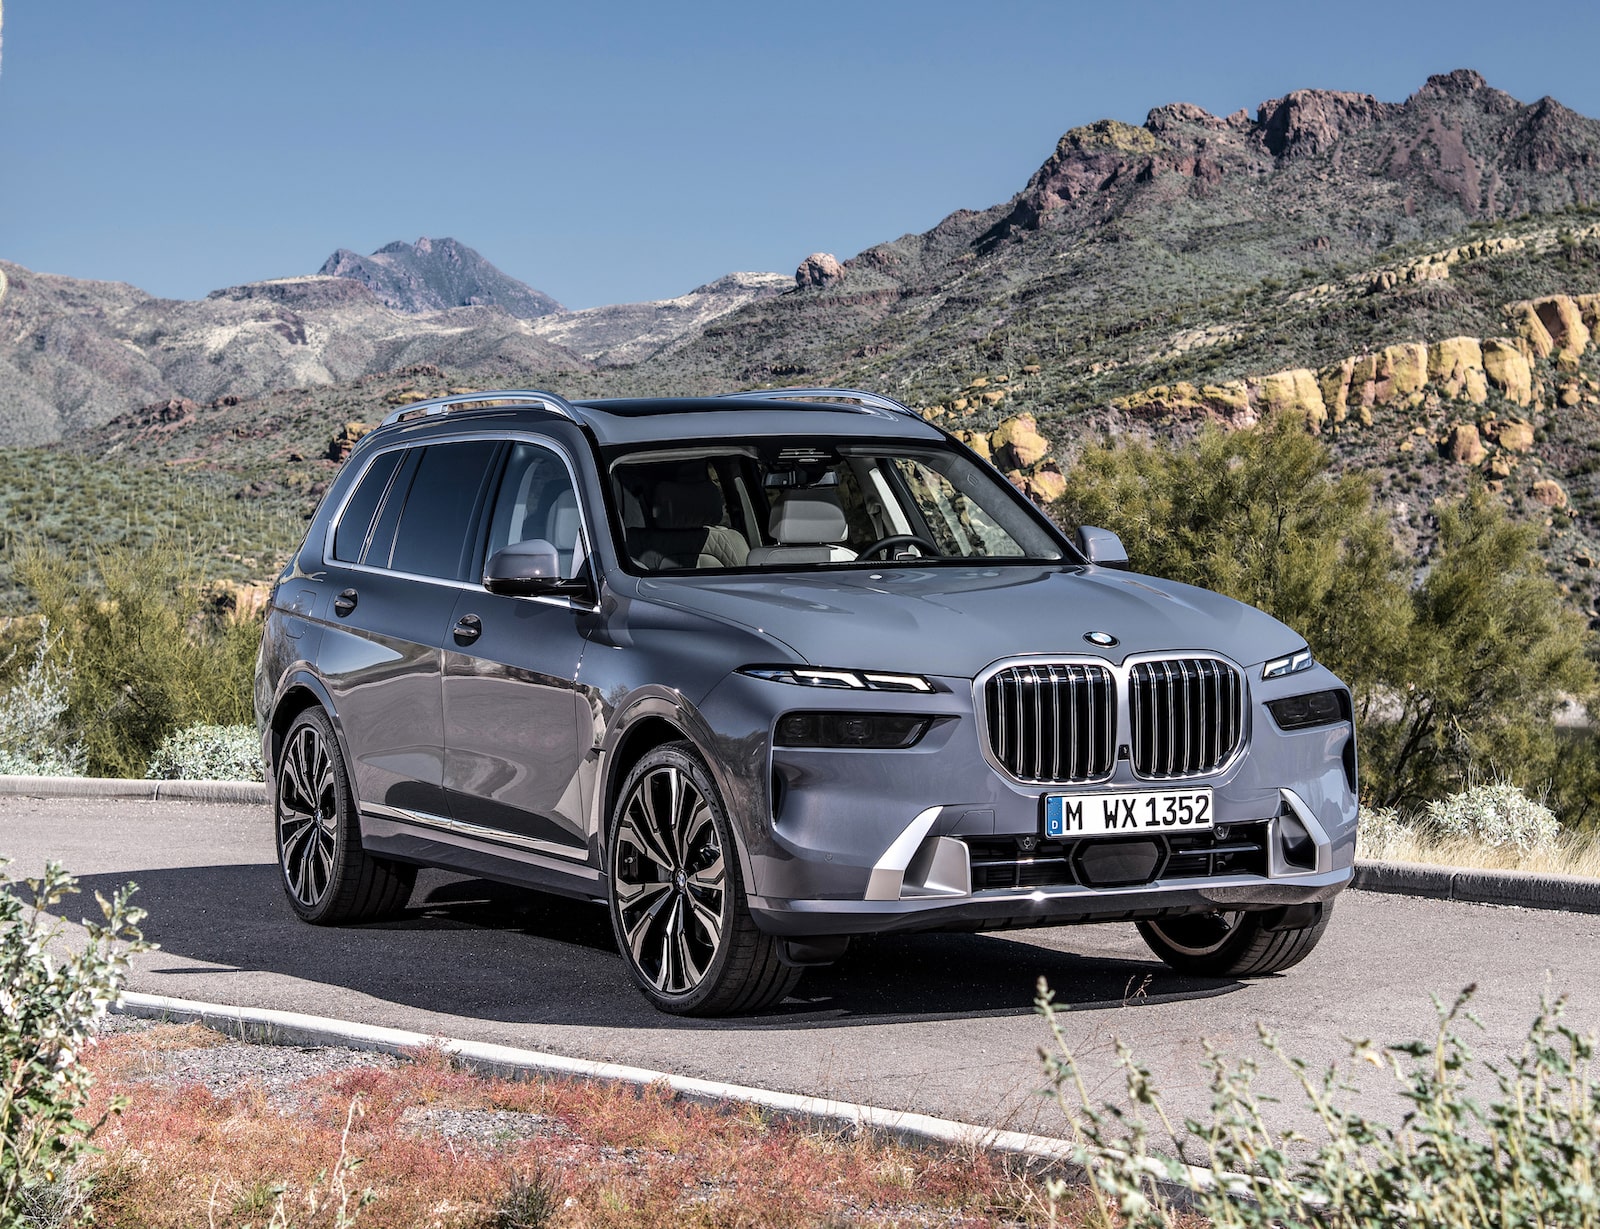 BMW Adds Entry-Level xDrive40i to X7 SUV Range, Priced at $167,900